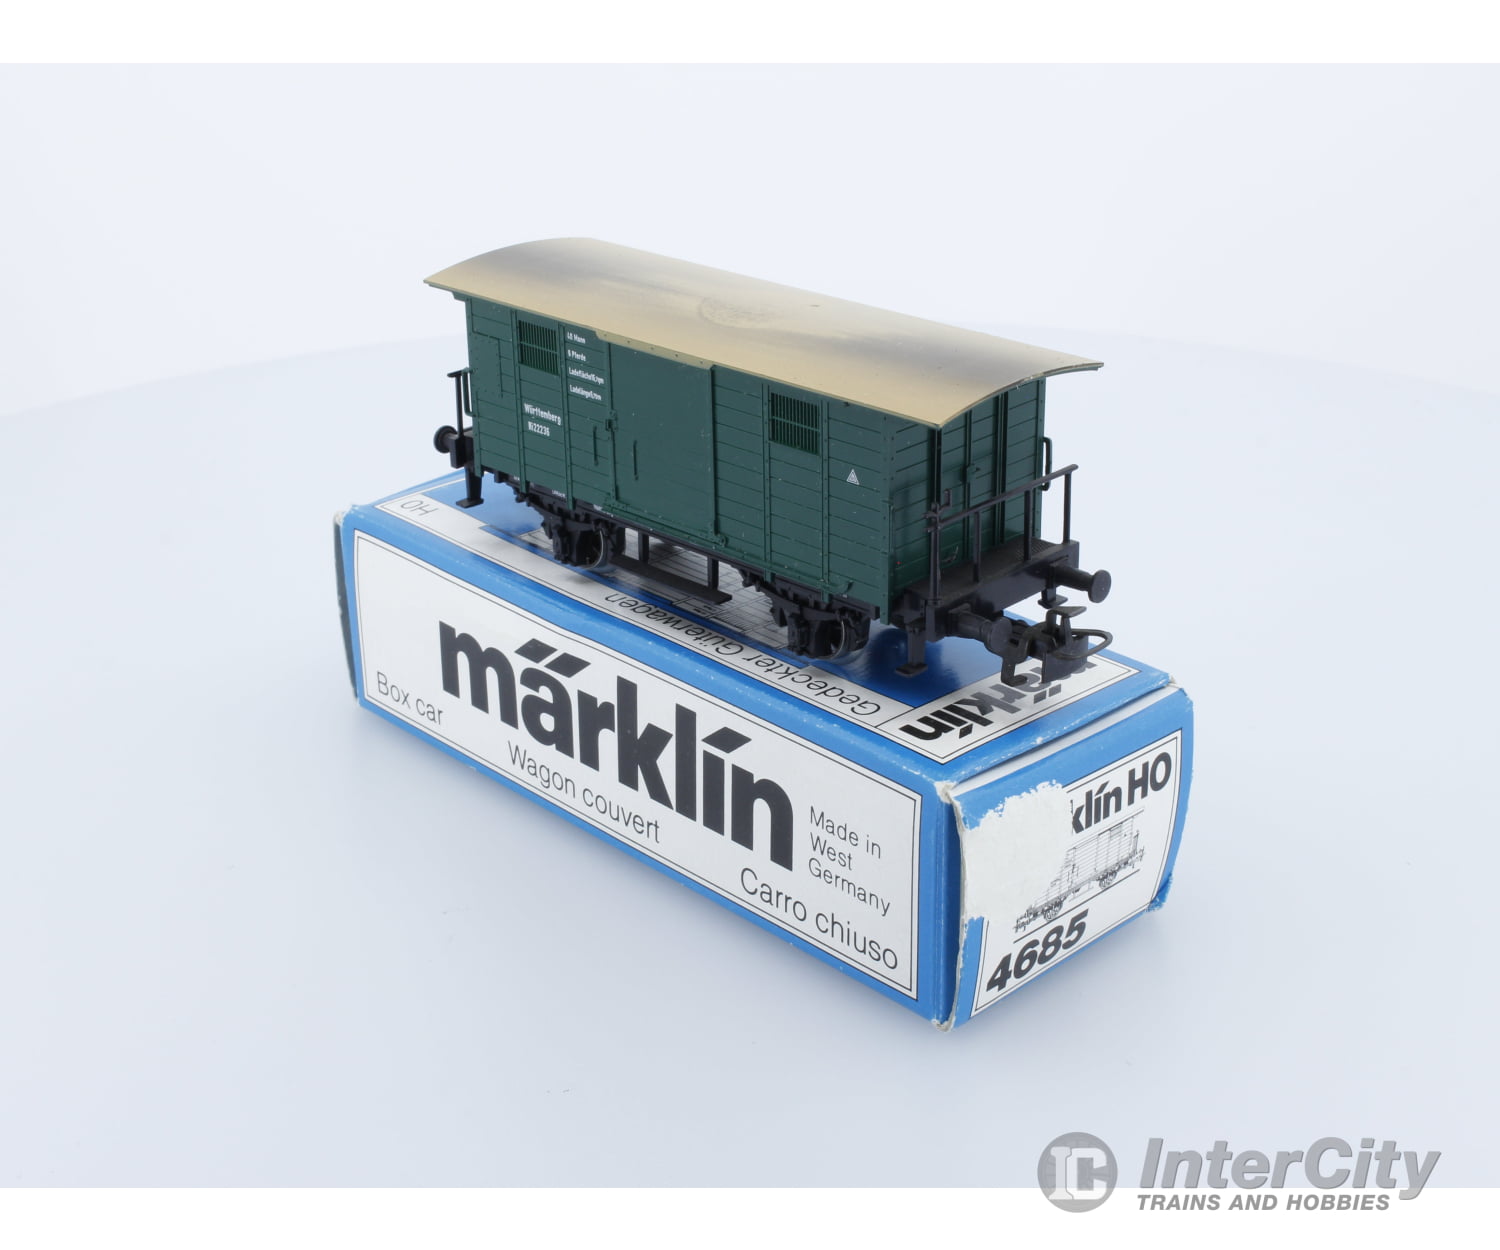 Marklin 4685 Ho Covered Boxcar Wurttemburg Ni 22236 Roof Weathering European Freight Cars